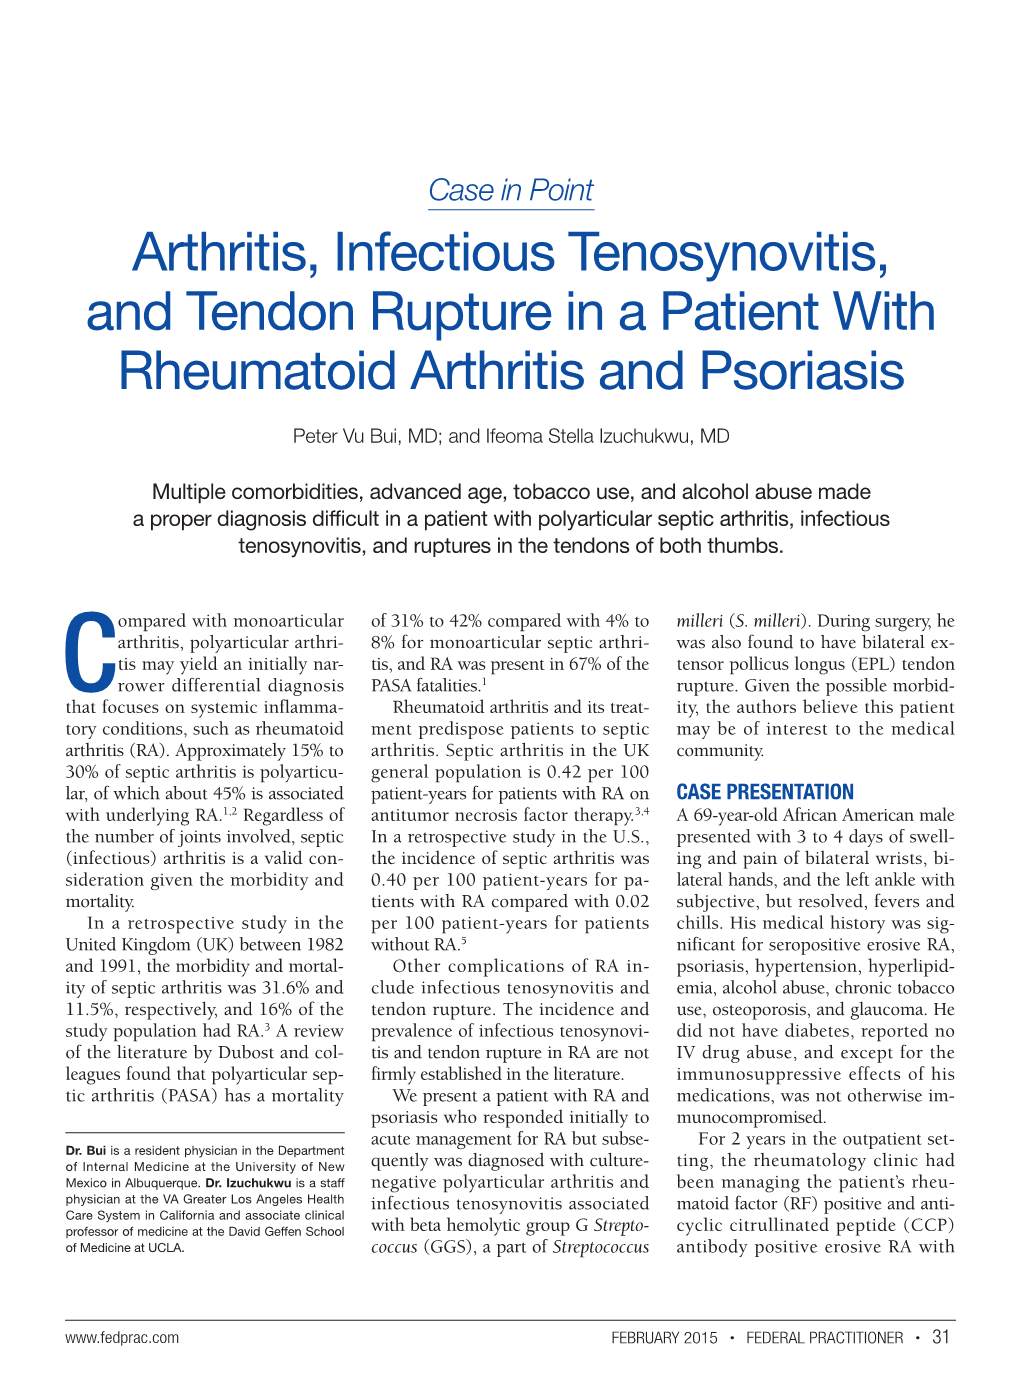 Arthritis, Infectious Tenosynovitis, and Tendon Rupture in a Patient with Rheumatoid Arthritis and Psoriasis